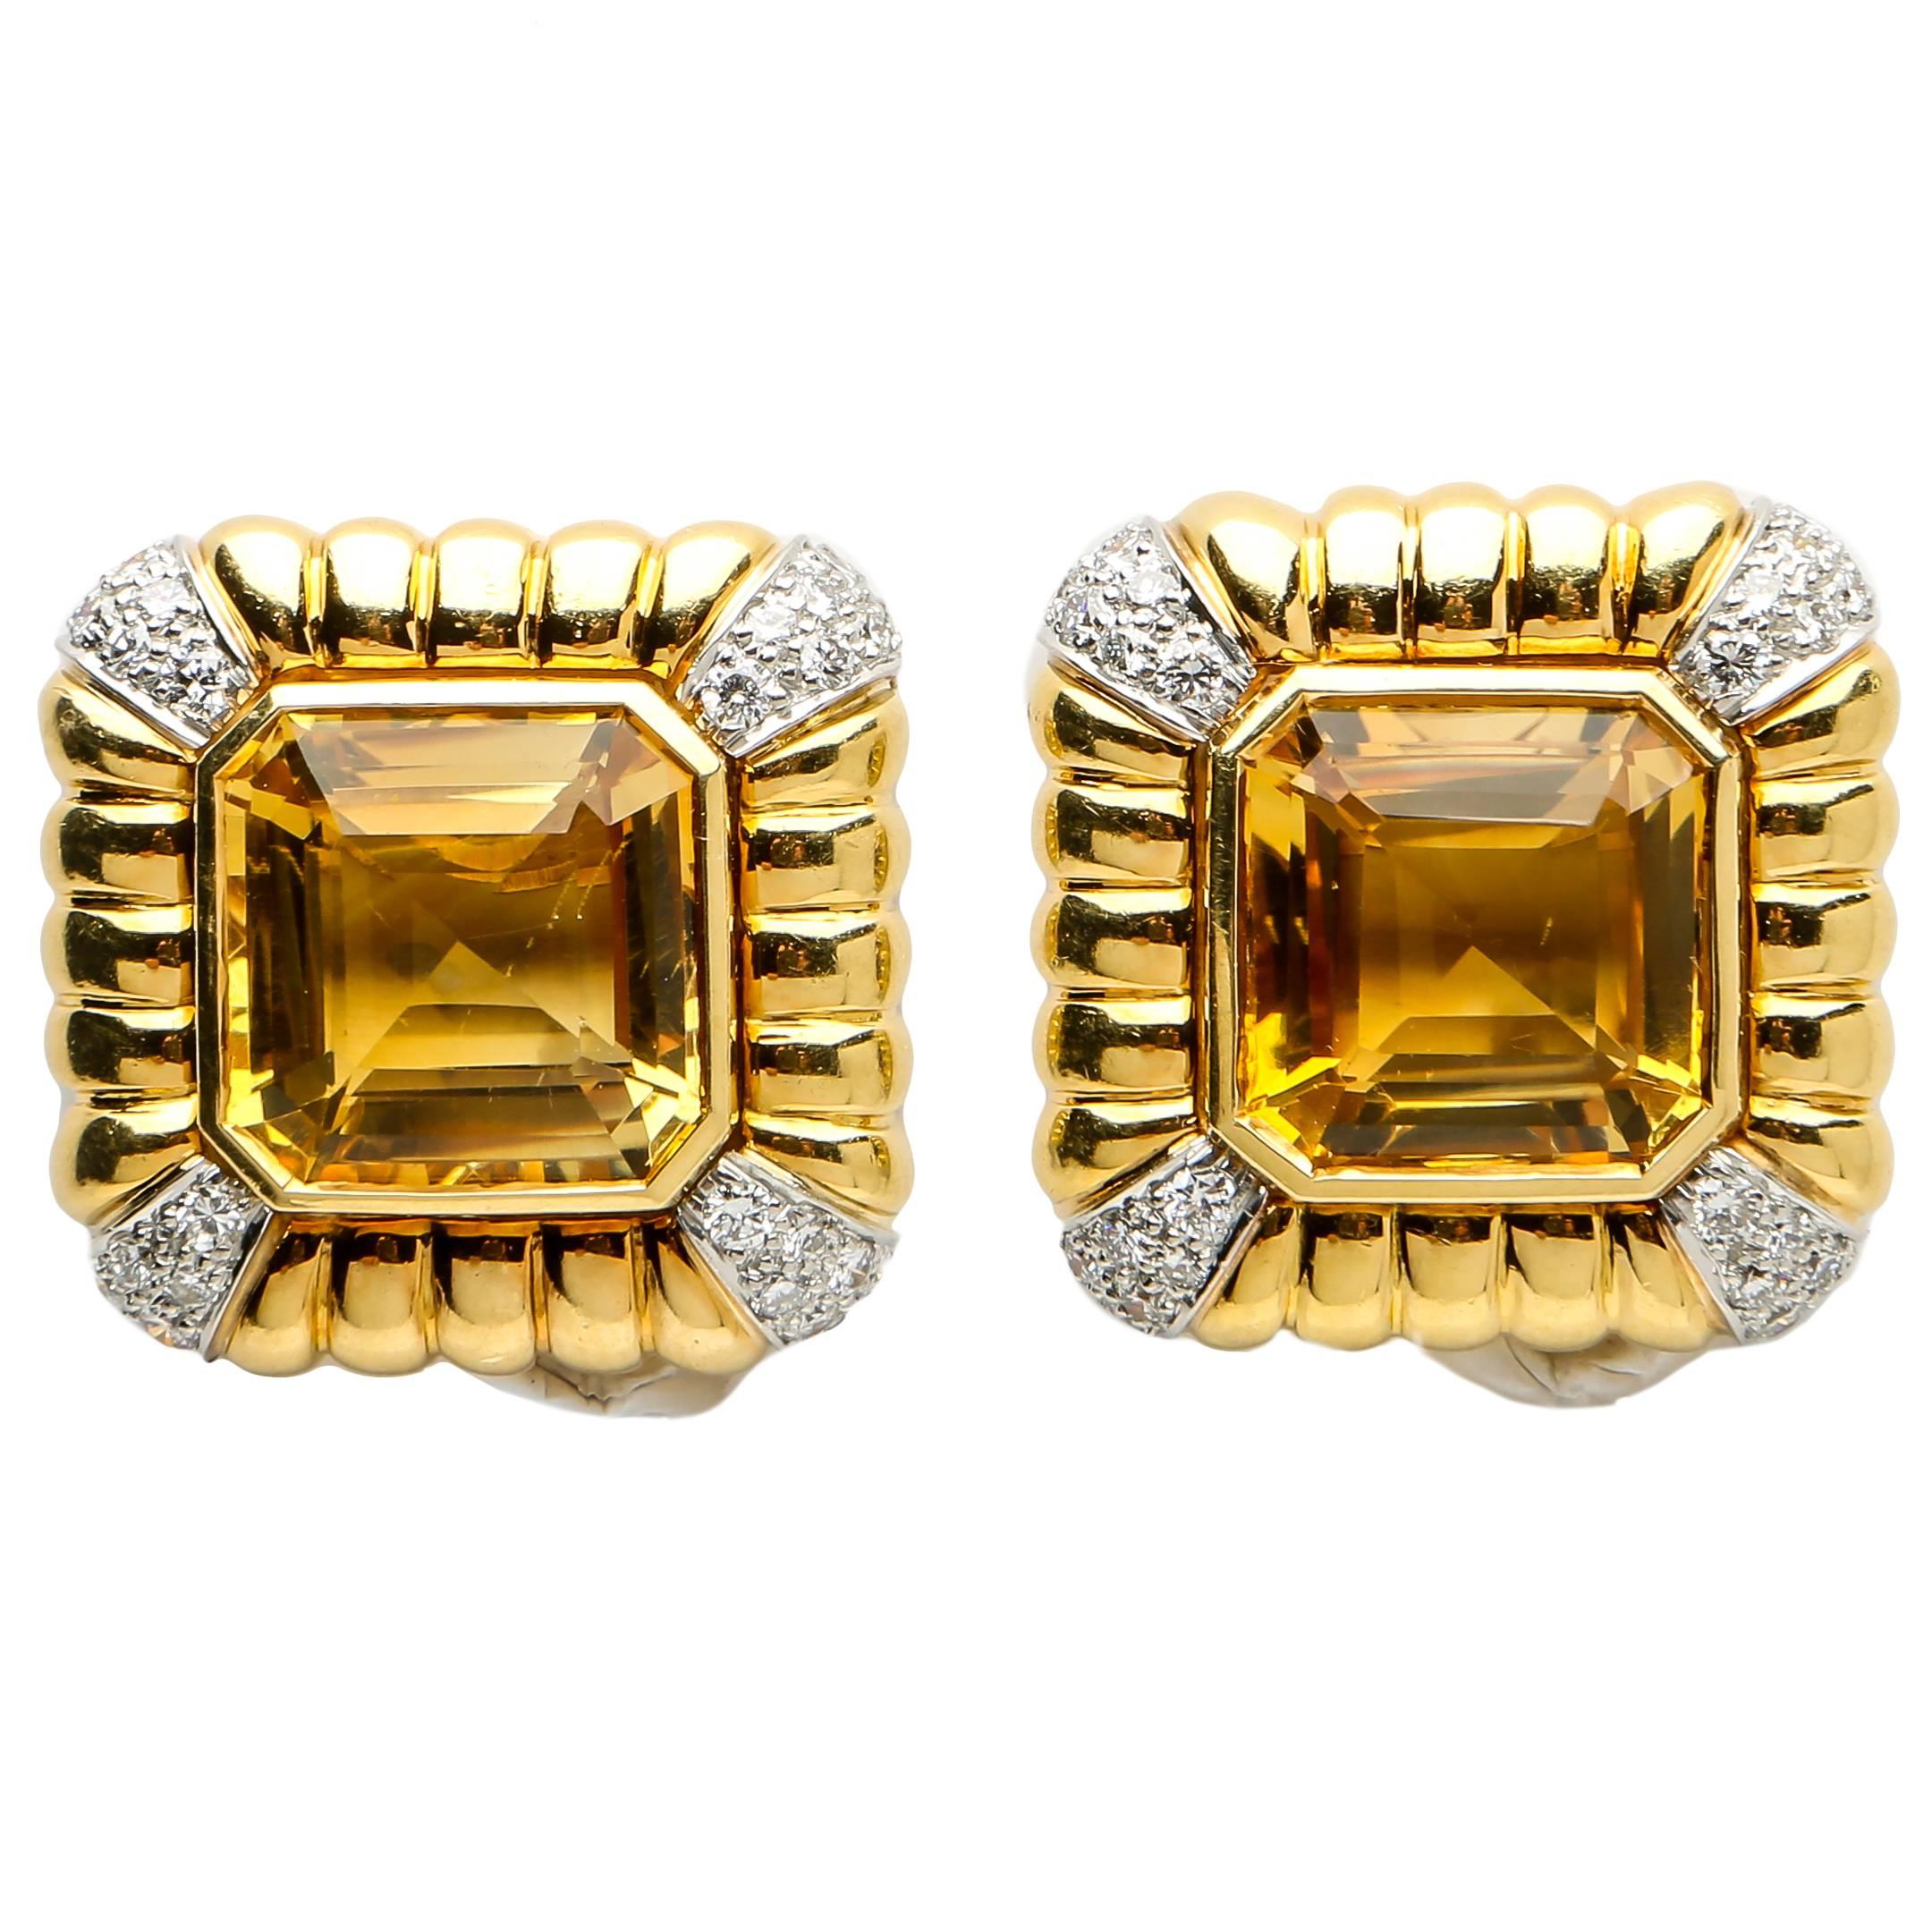 Andrew Clunn's long time affiliation with David Webb shows through in this bold classic design. Bright faceted citrines are set in heavy fluted frames and accented with brilliant cut diamonds. Simply elegant !  7/8's of an inch in size.